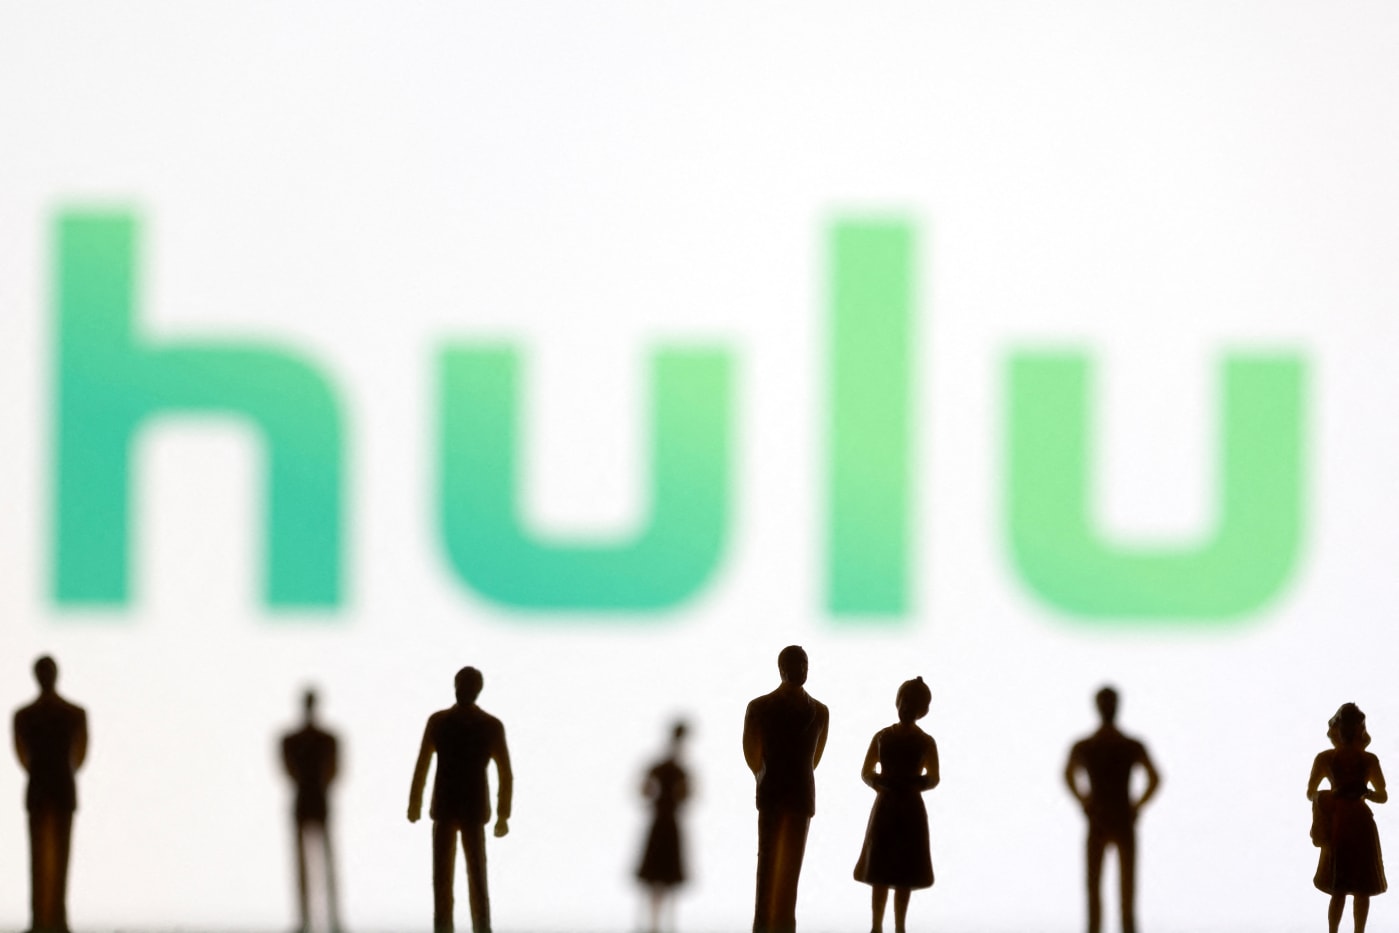 Hulu is the latest streaming service to crack down on password sharing